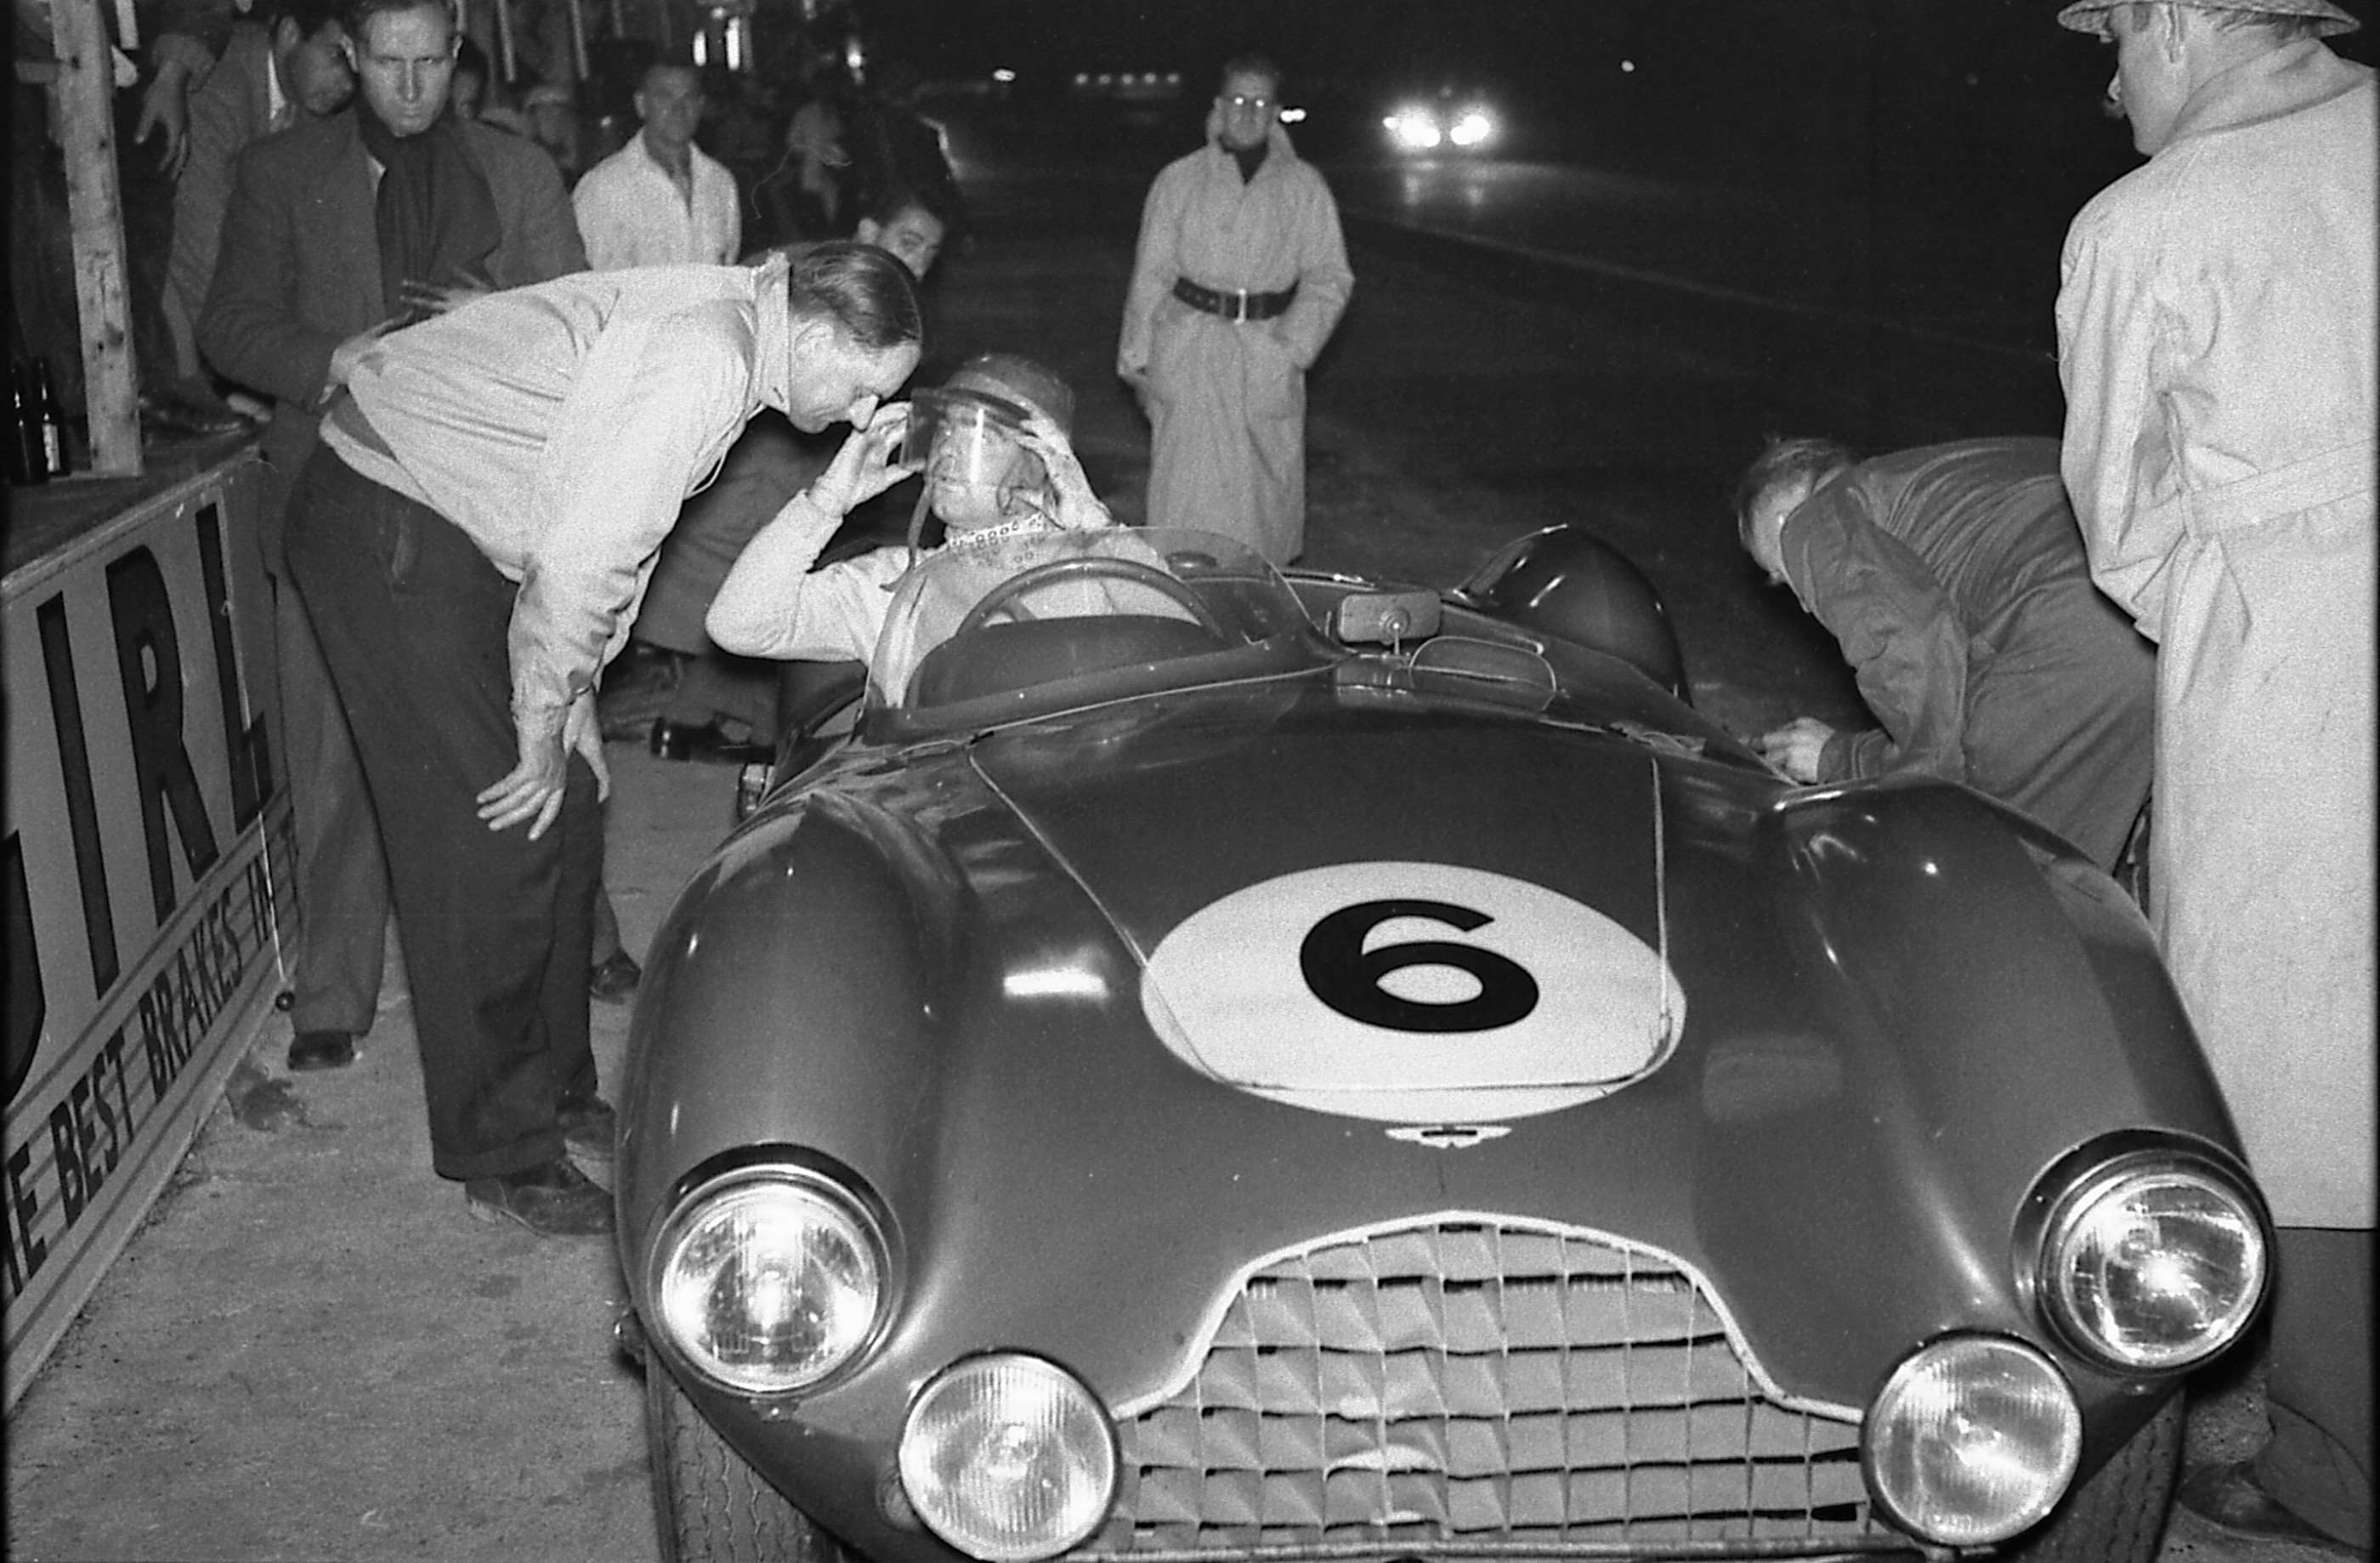 Aston Martin’s recovered racing manager John Wyer in patient conversation with 1952 winner Pat Griffith during the 1953 edition of the Goodwood 9-Hour race. The Aston Martin DB3S was such a beauty compared to its DB3 predecessor...